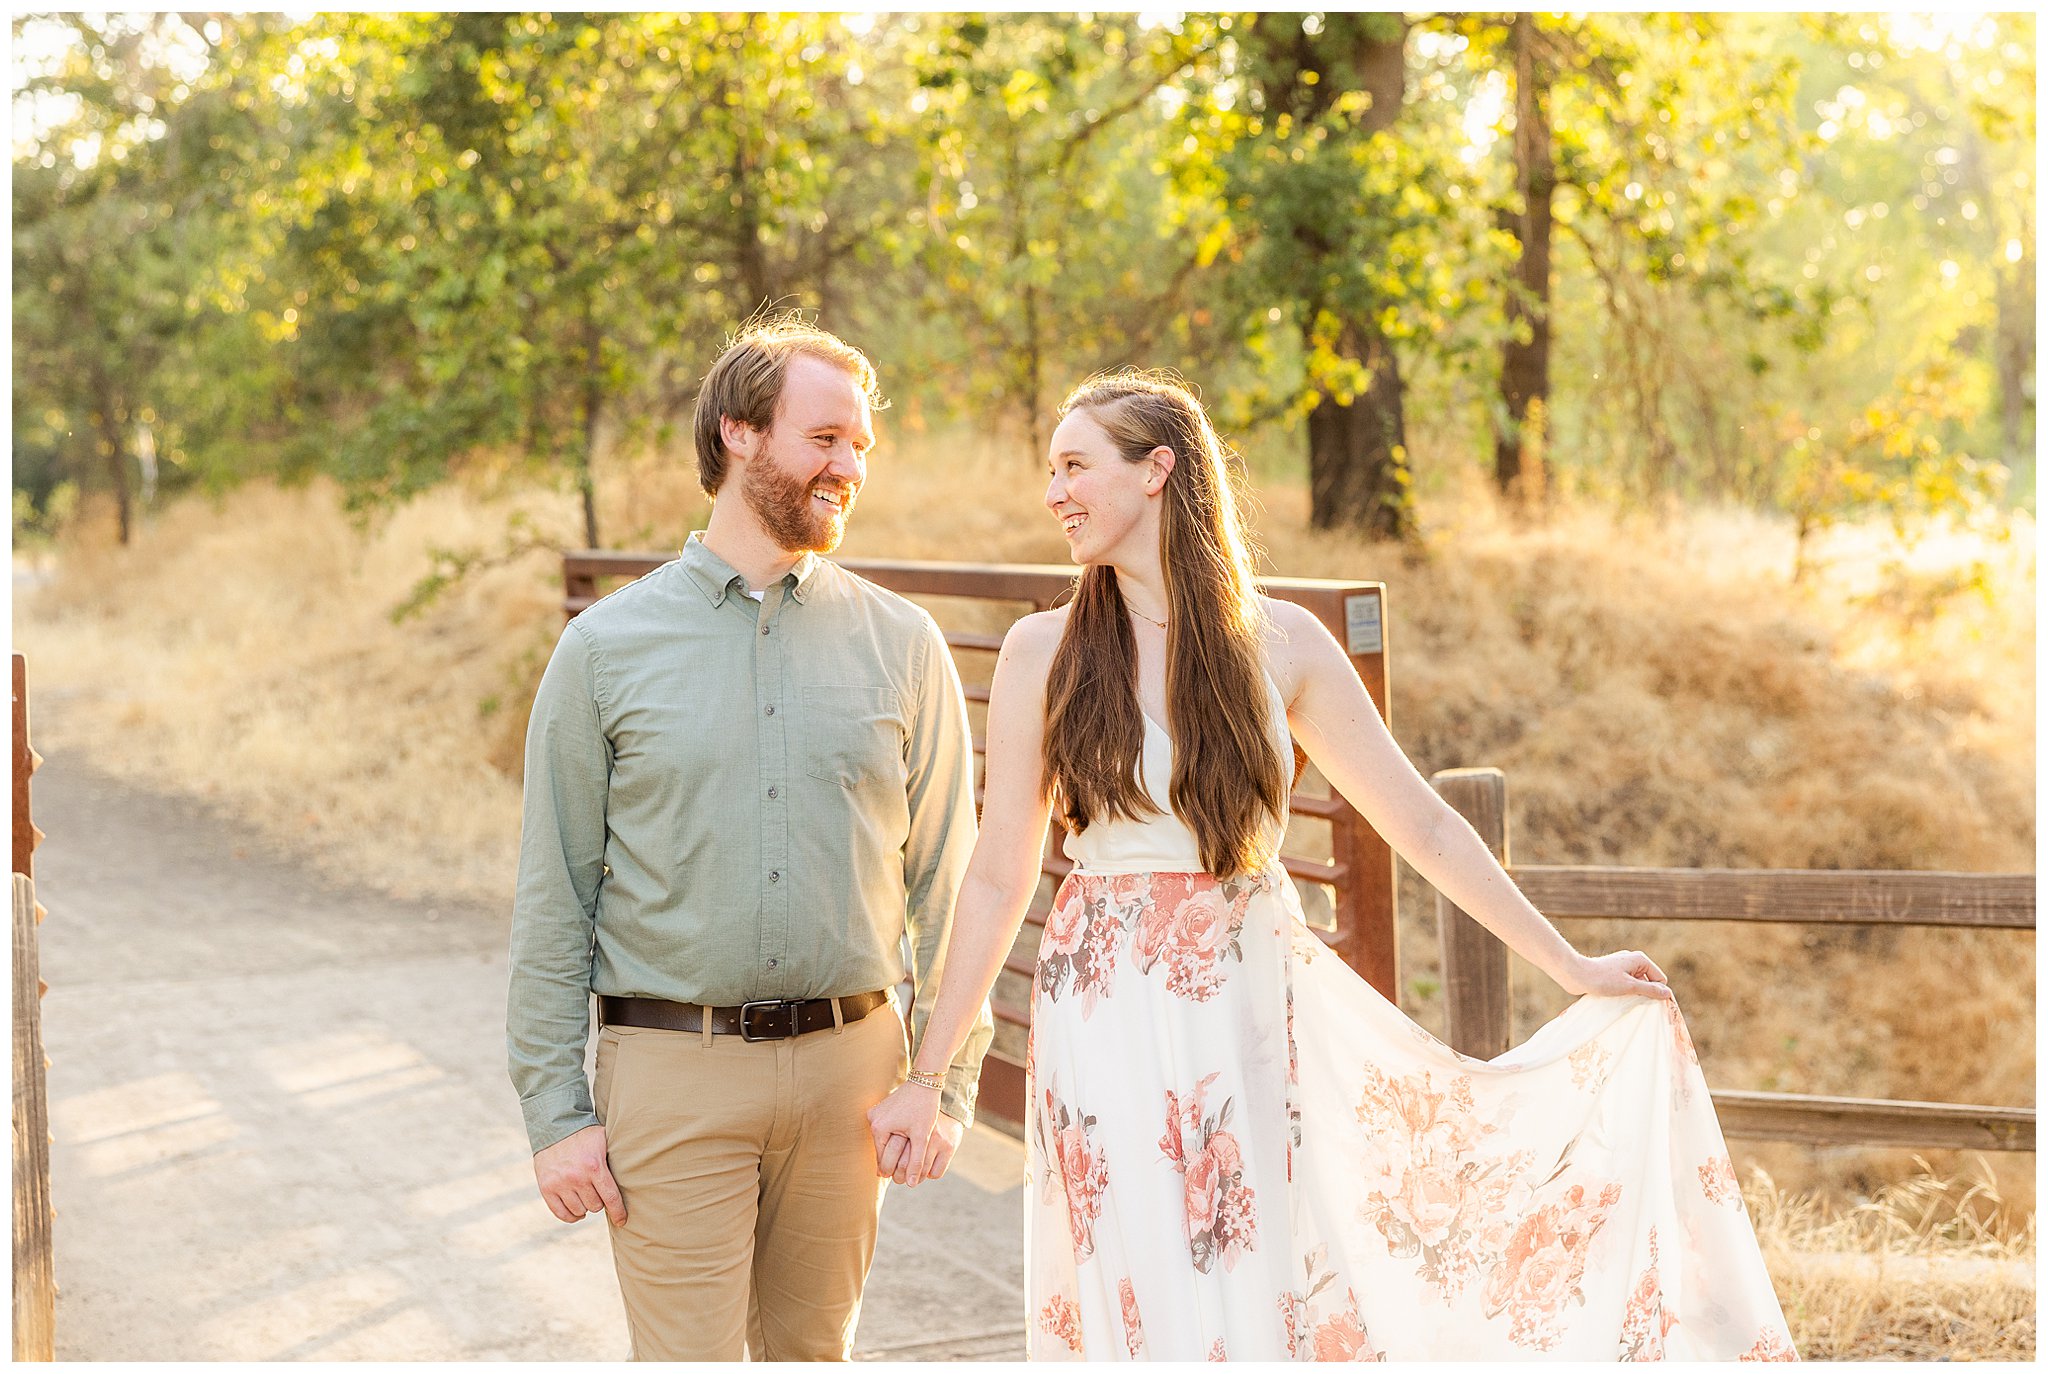 Grass Field Engagement Session Chico CA Cake Valley Oak Trees Summer August,